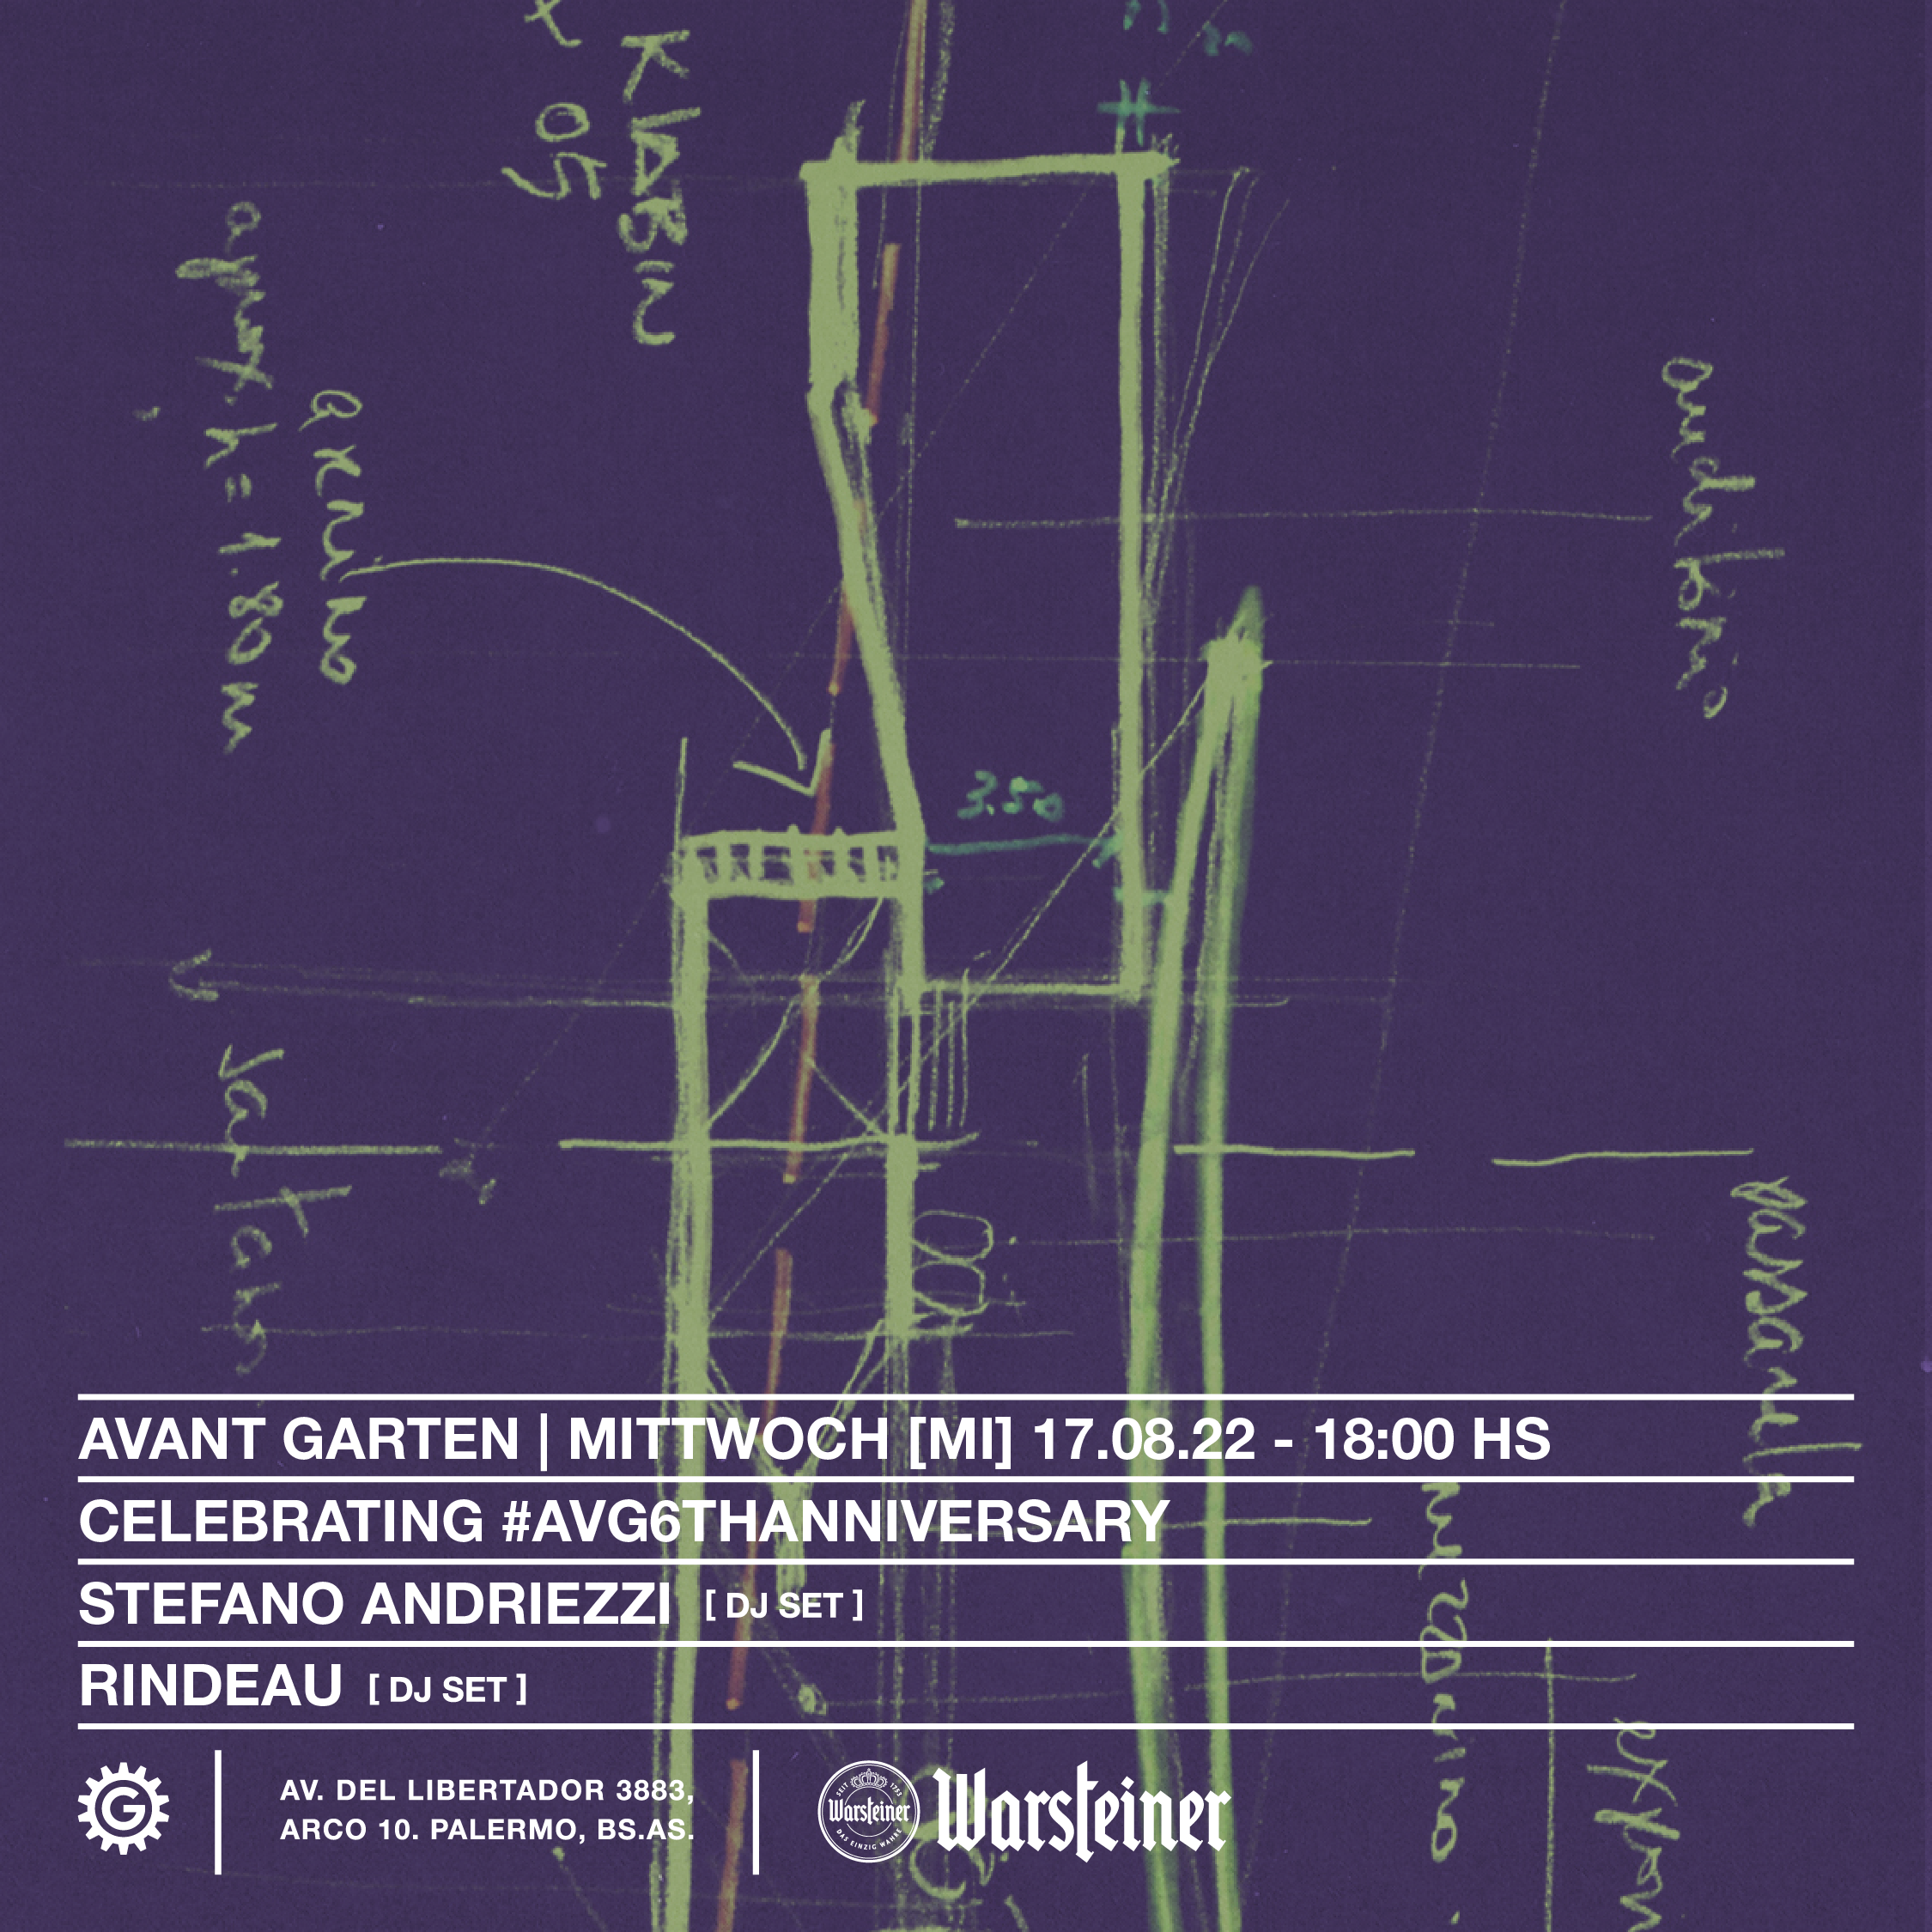 Mittwoch: Stefano Andriezzi, Rindeau - Flyer front